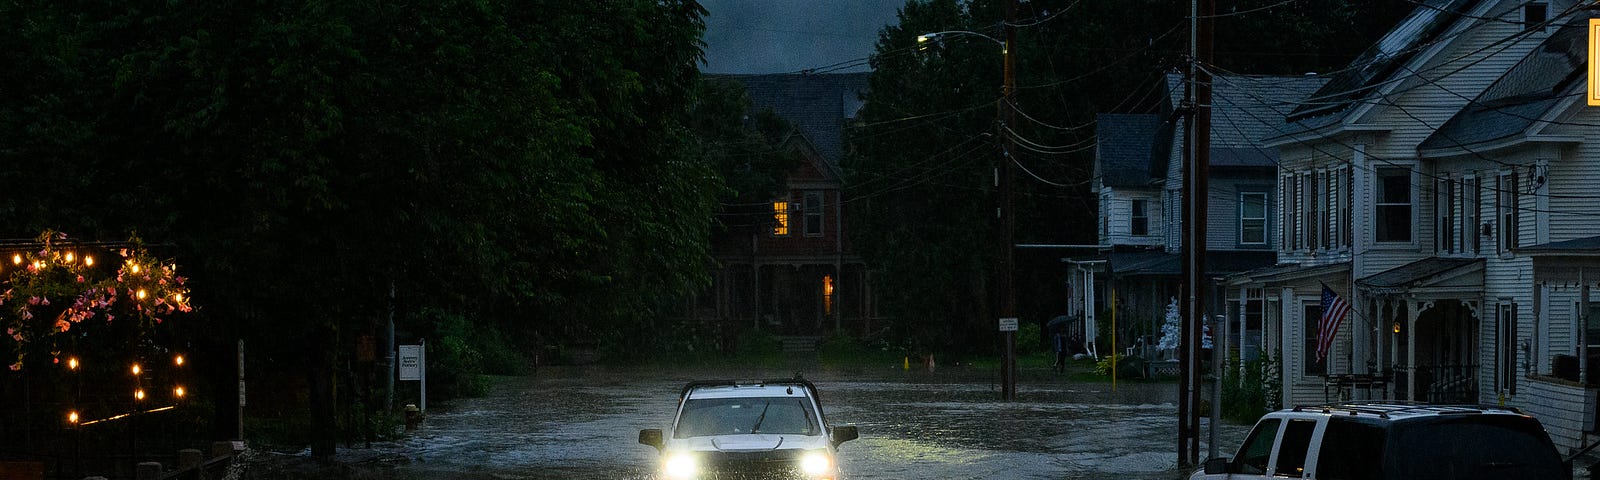 On a dark village street in the rain, headlights of an SUV shine barely above road level as the vehicle plunges through a flood